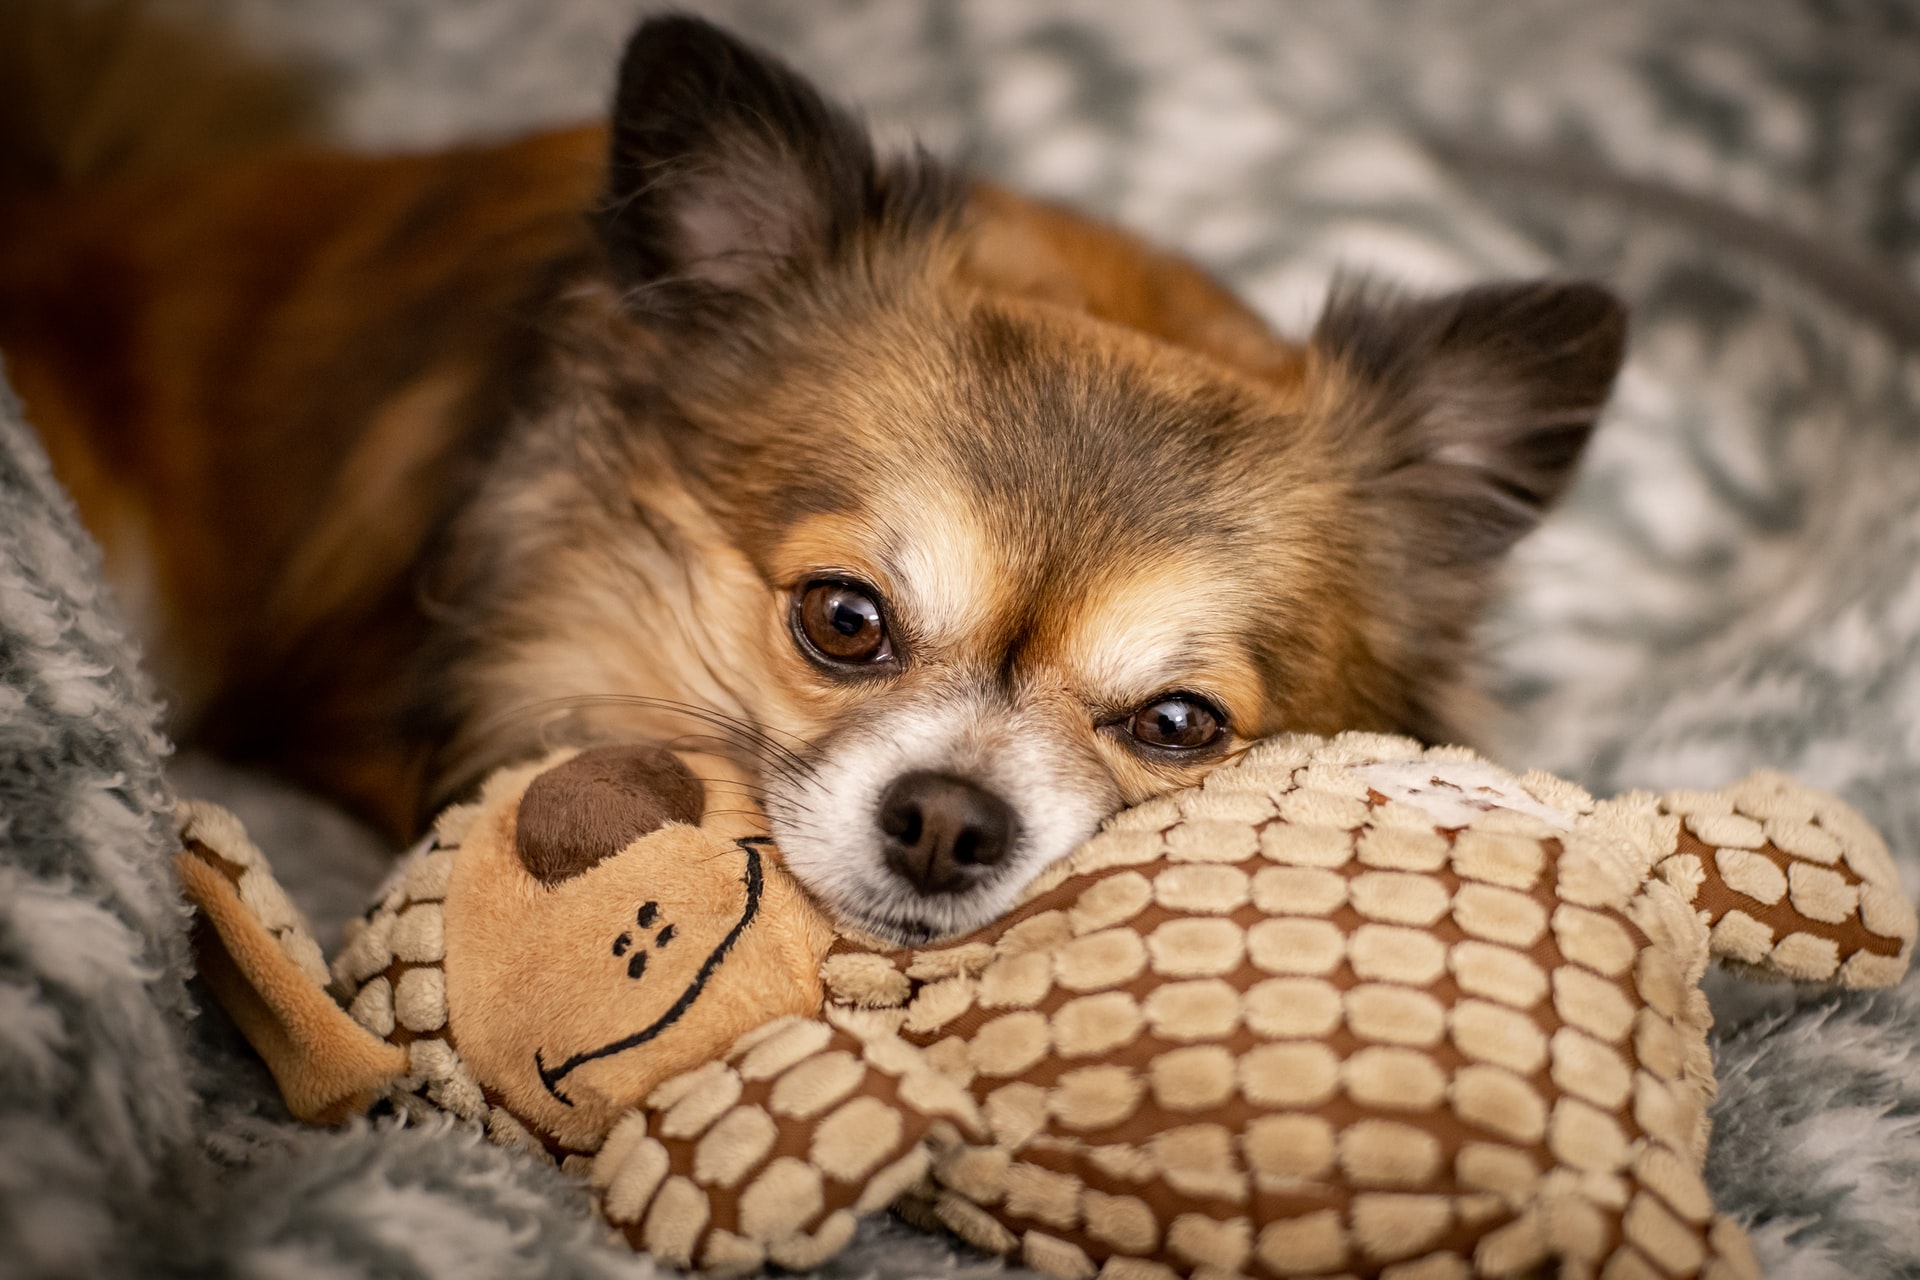 Chihuahua lying with a toy as a pillow